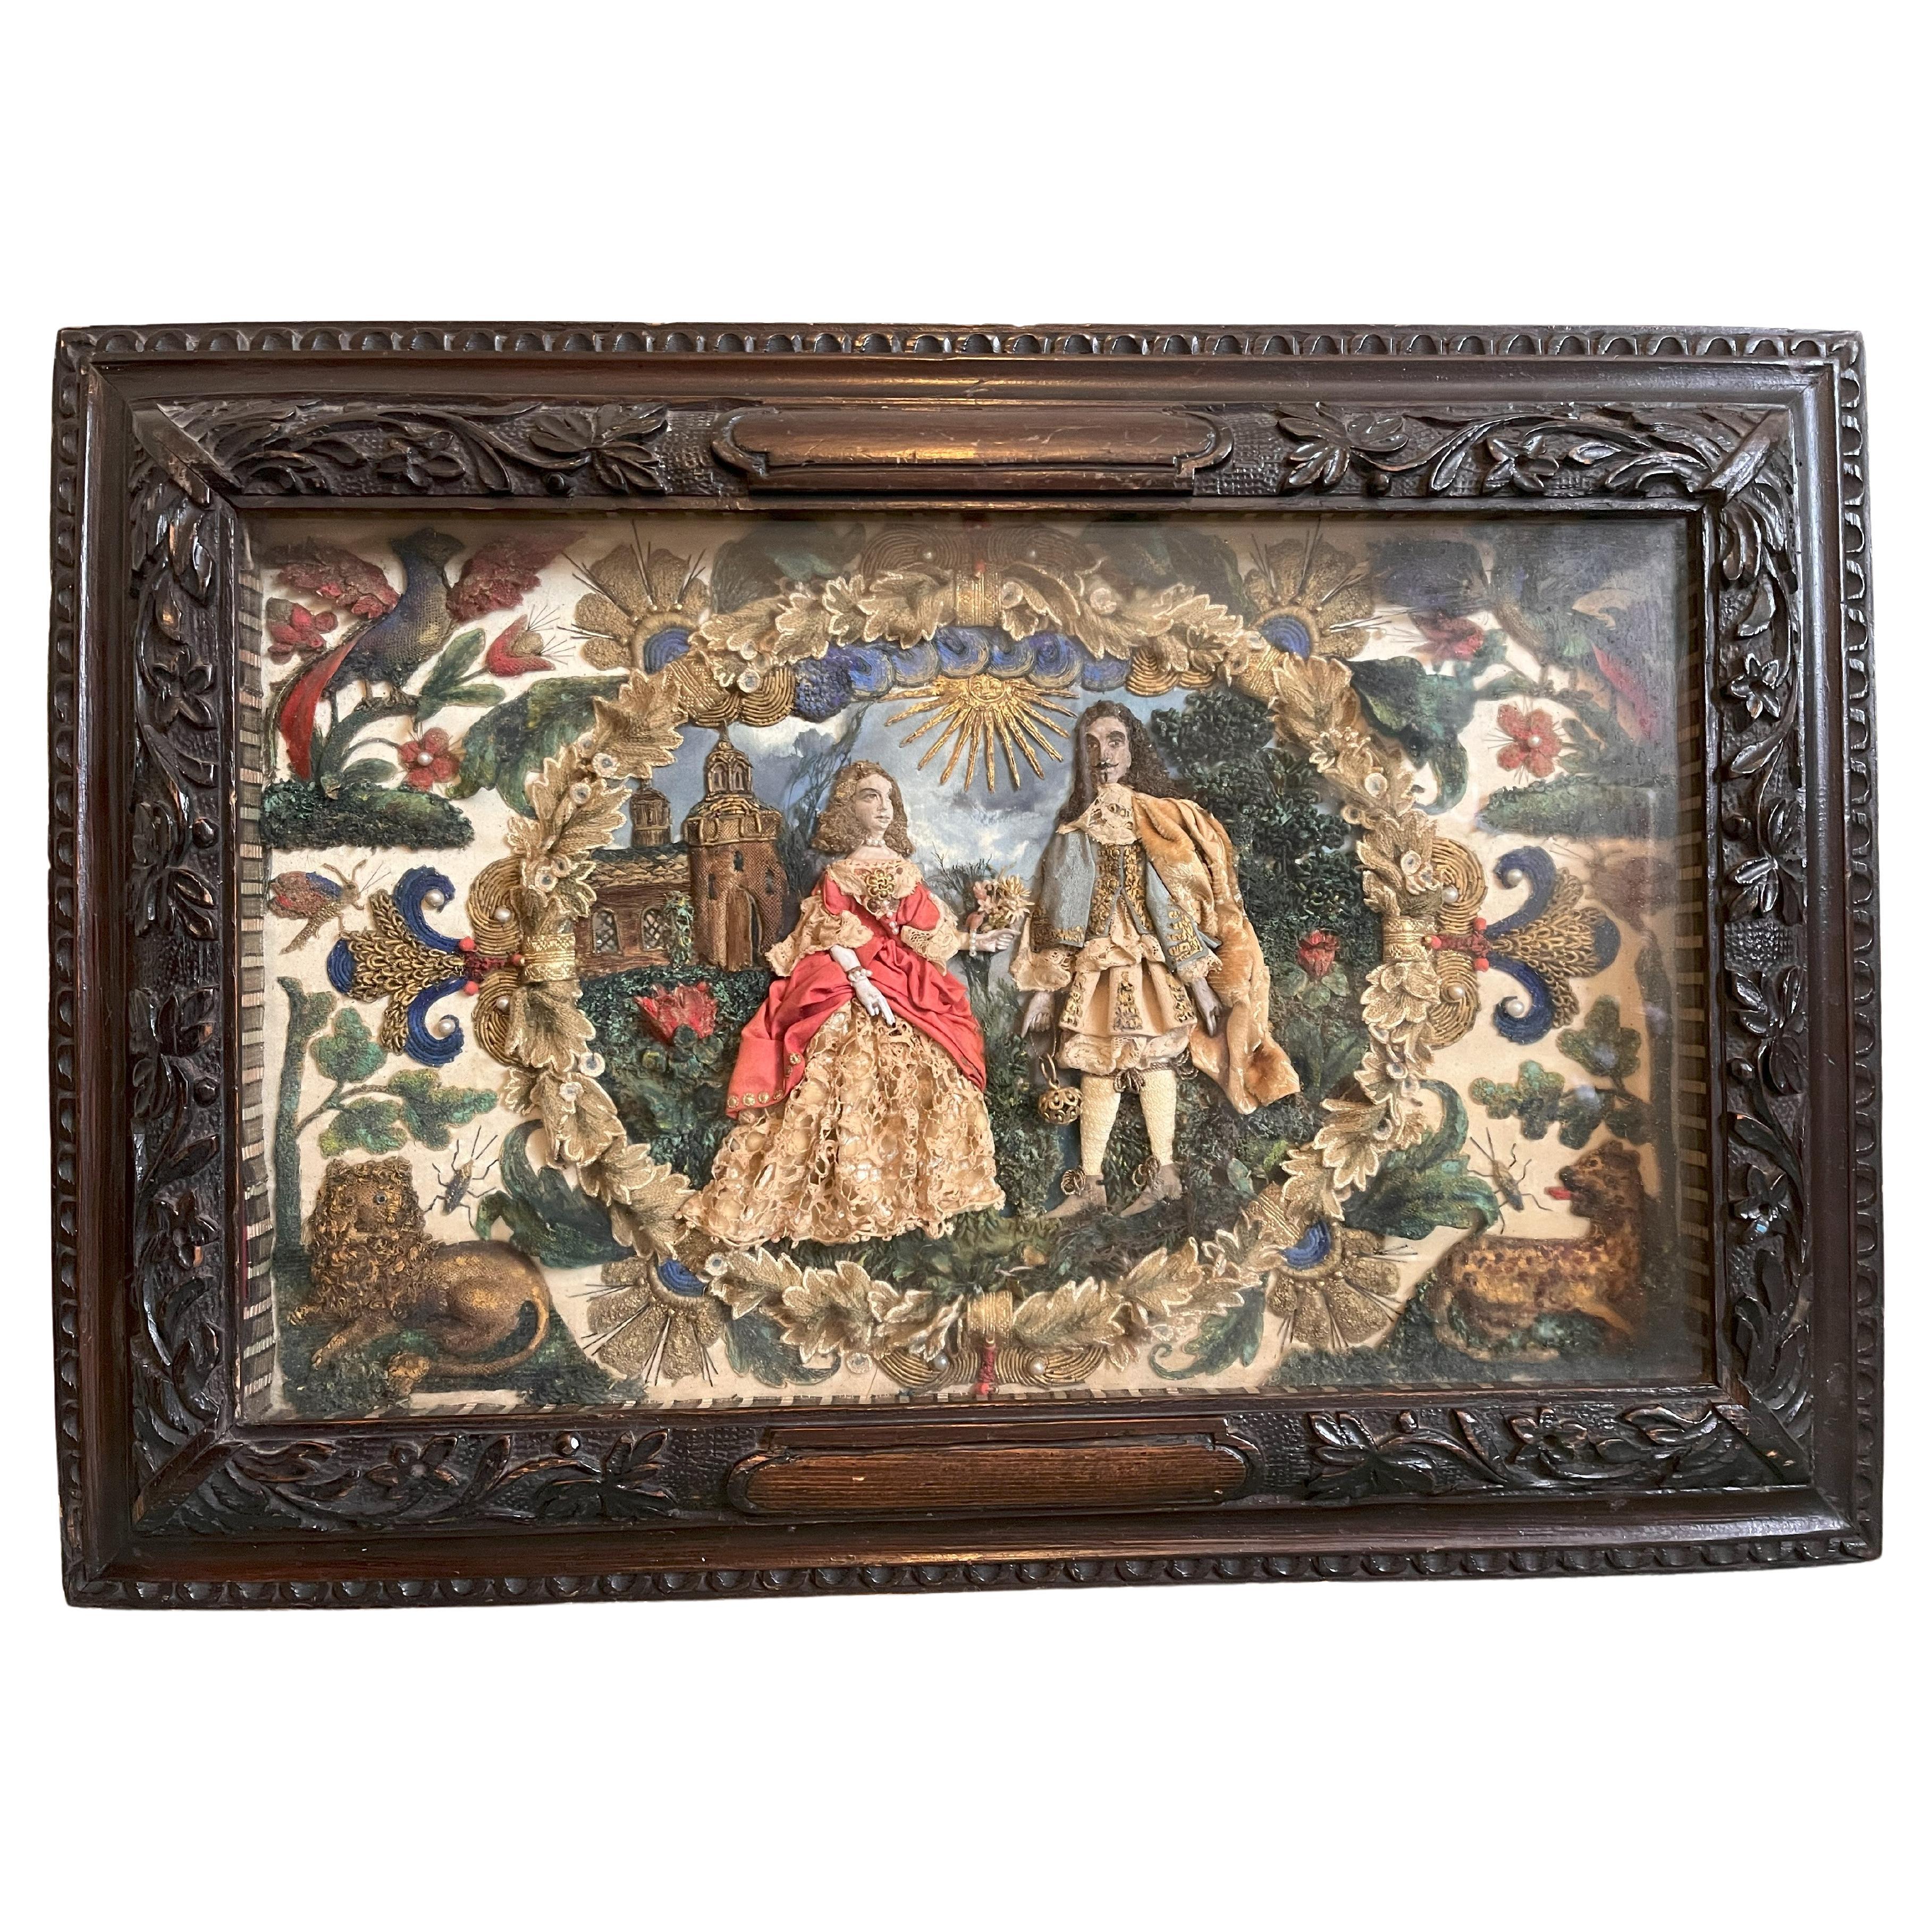 Ivory Stuart period Stumpwork panel - King Charles II and his favourite Lady For Sale